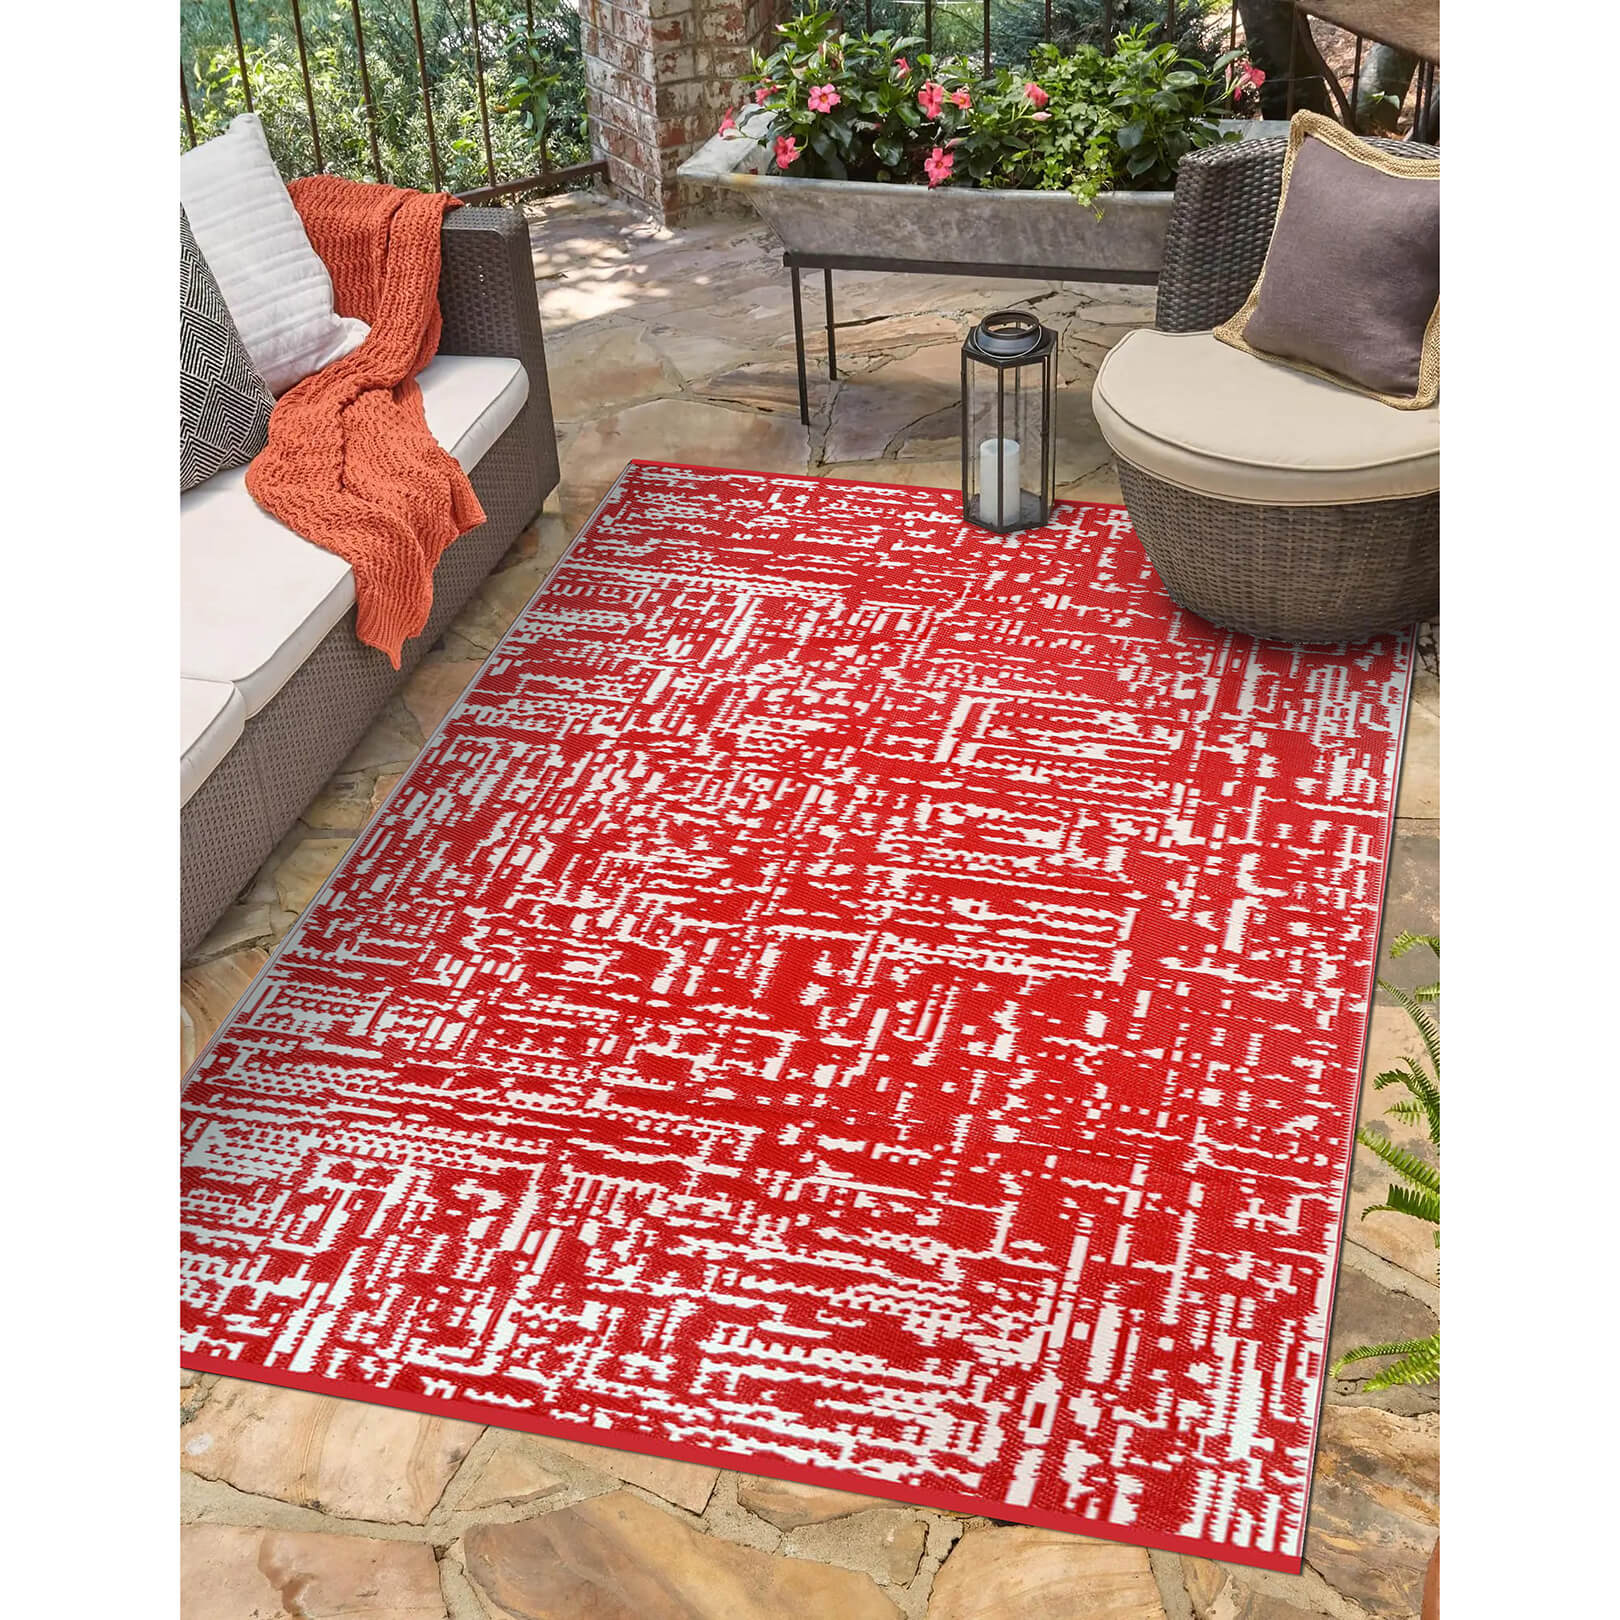 Cosmopolitan Outdoor Recycled Plastic Rug (Red/White)